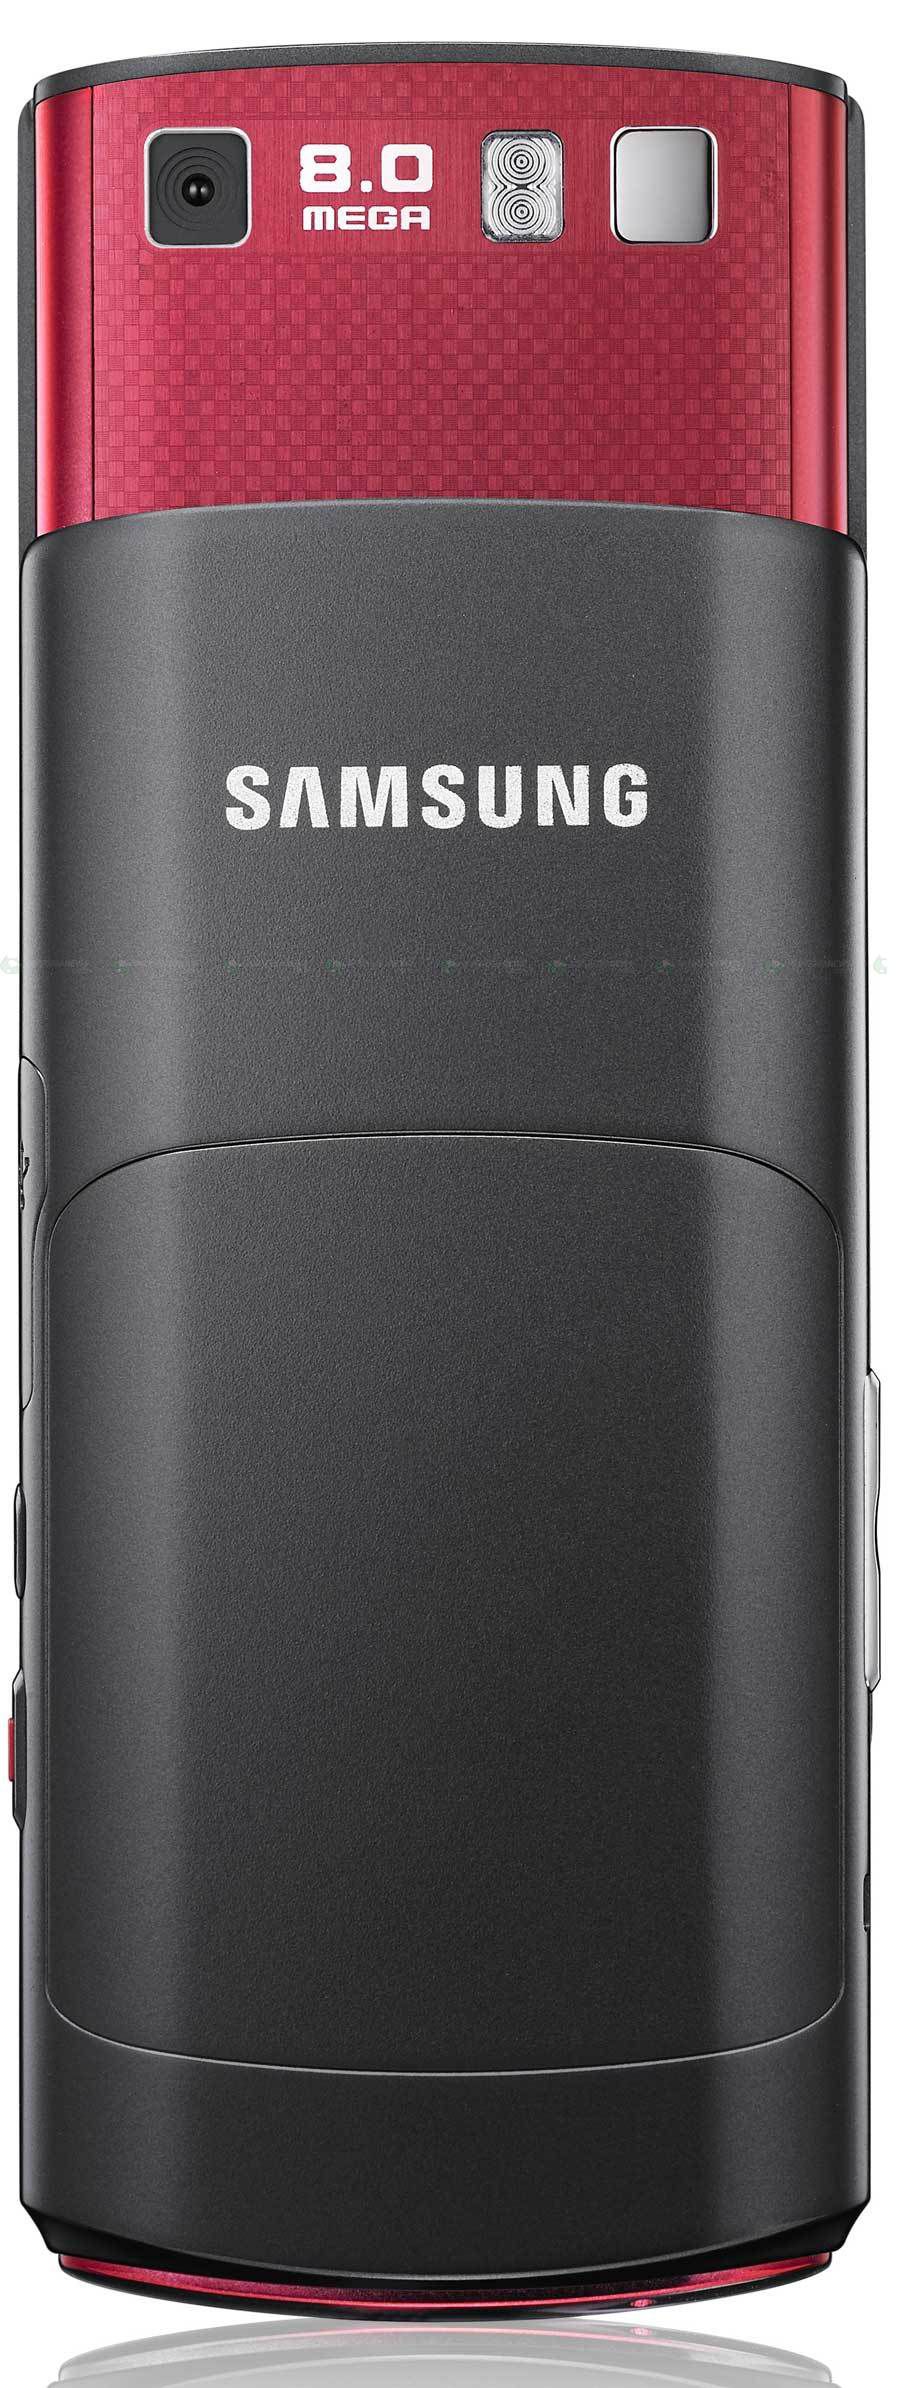 Samsung S8300 Ultra Touch 2